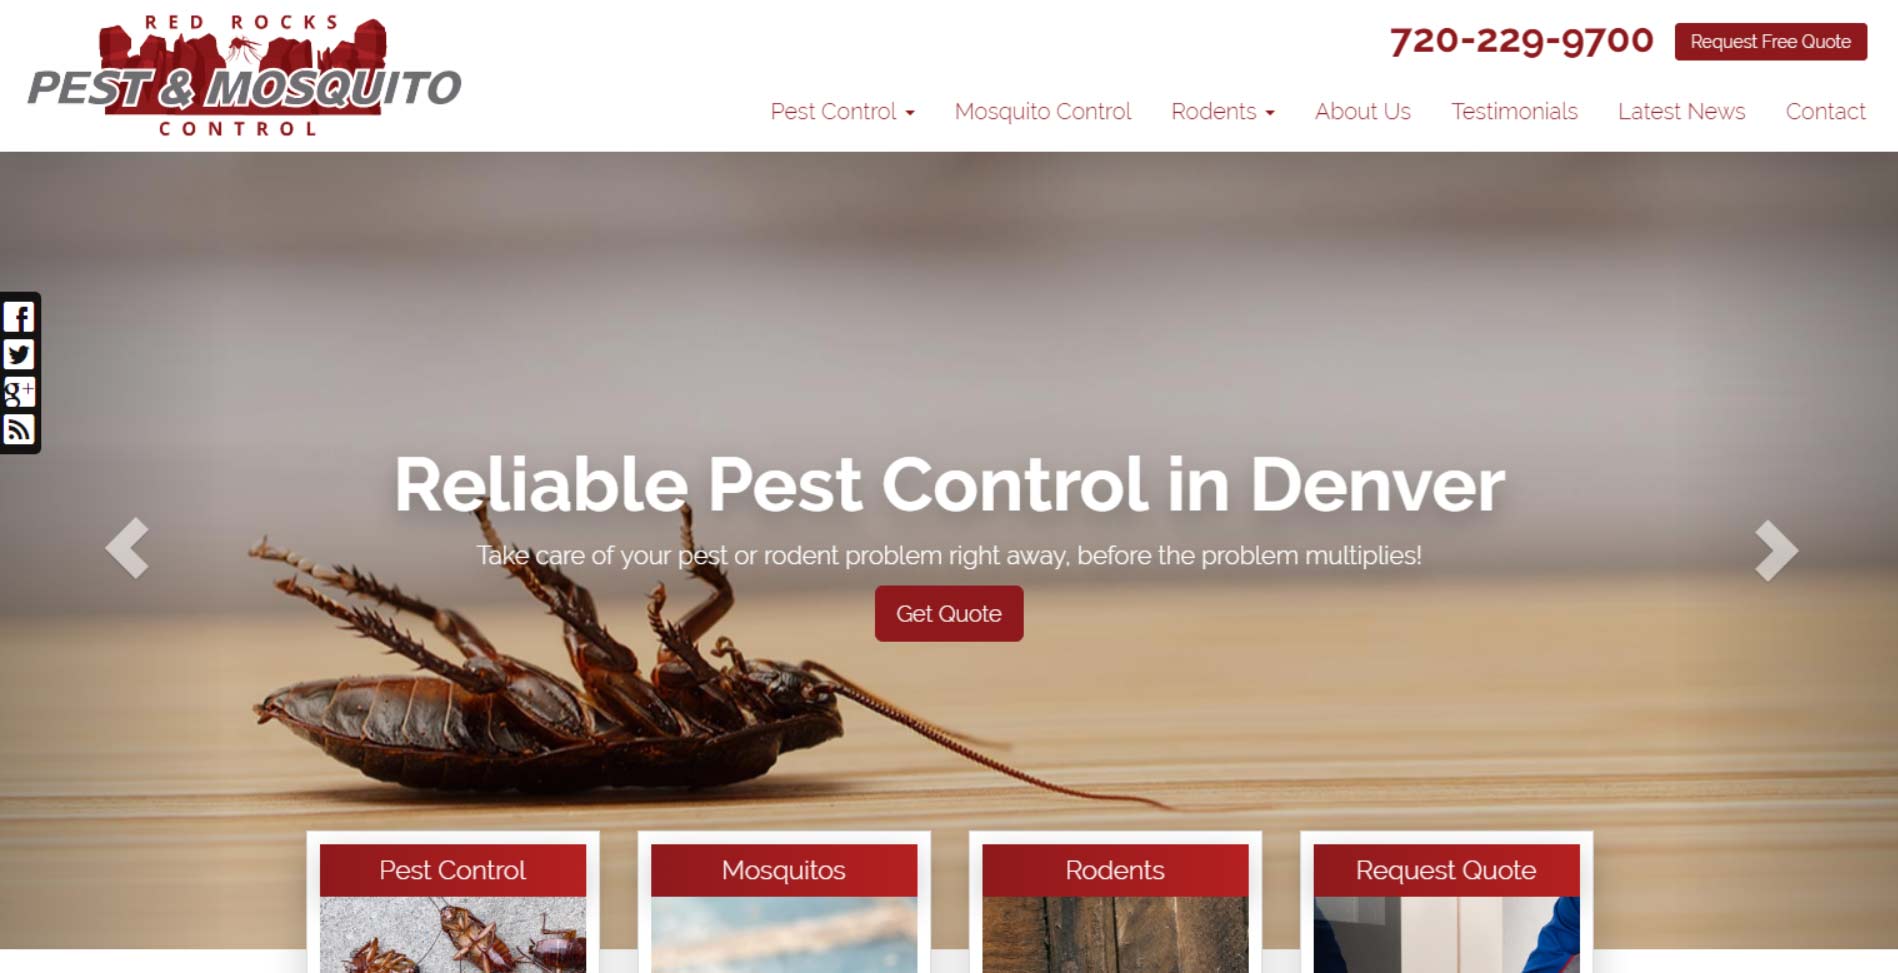 
New Website Launched: Red Rocks Pest & Mosquito Control